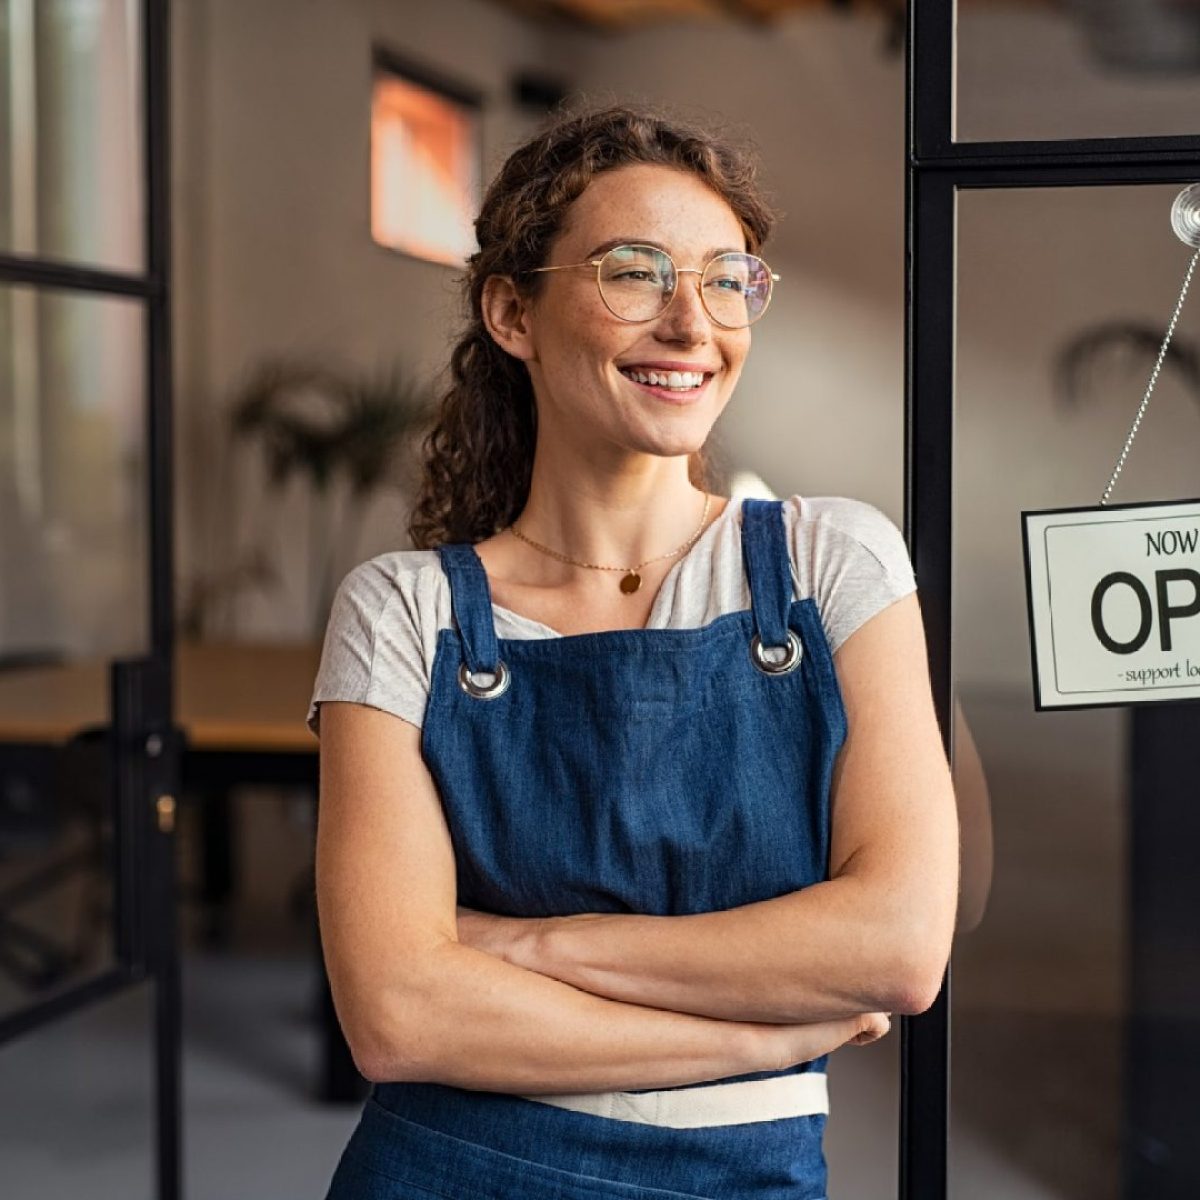 new business start-up owner standing in front of cafe with open sign